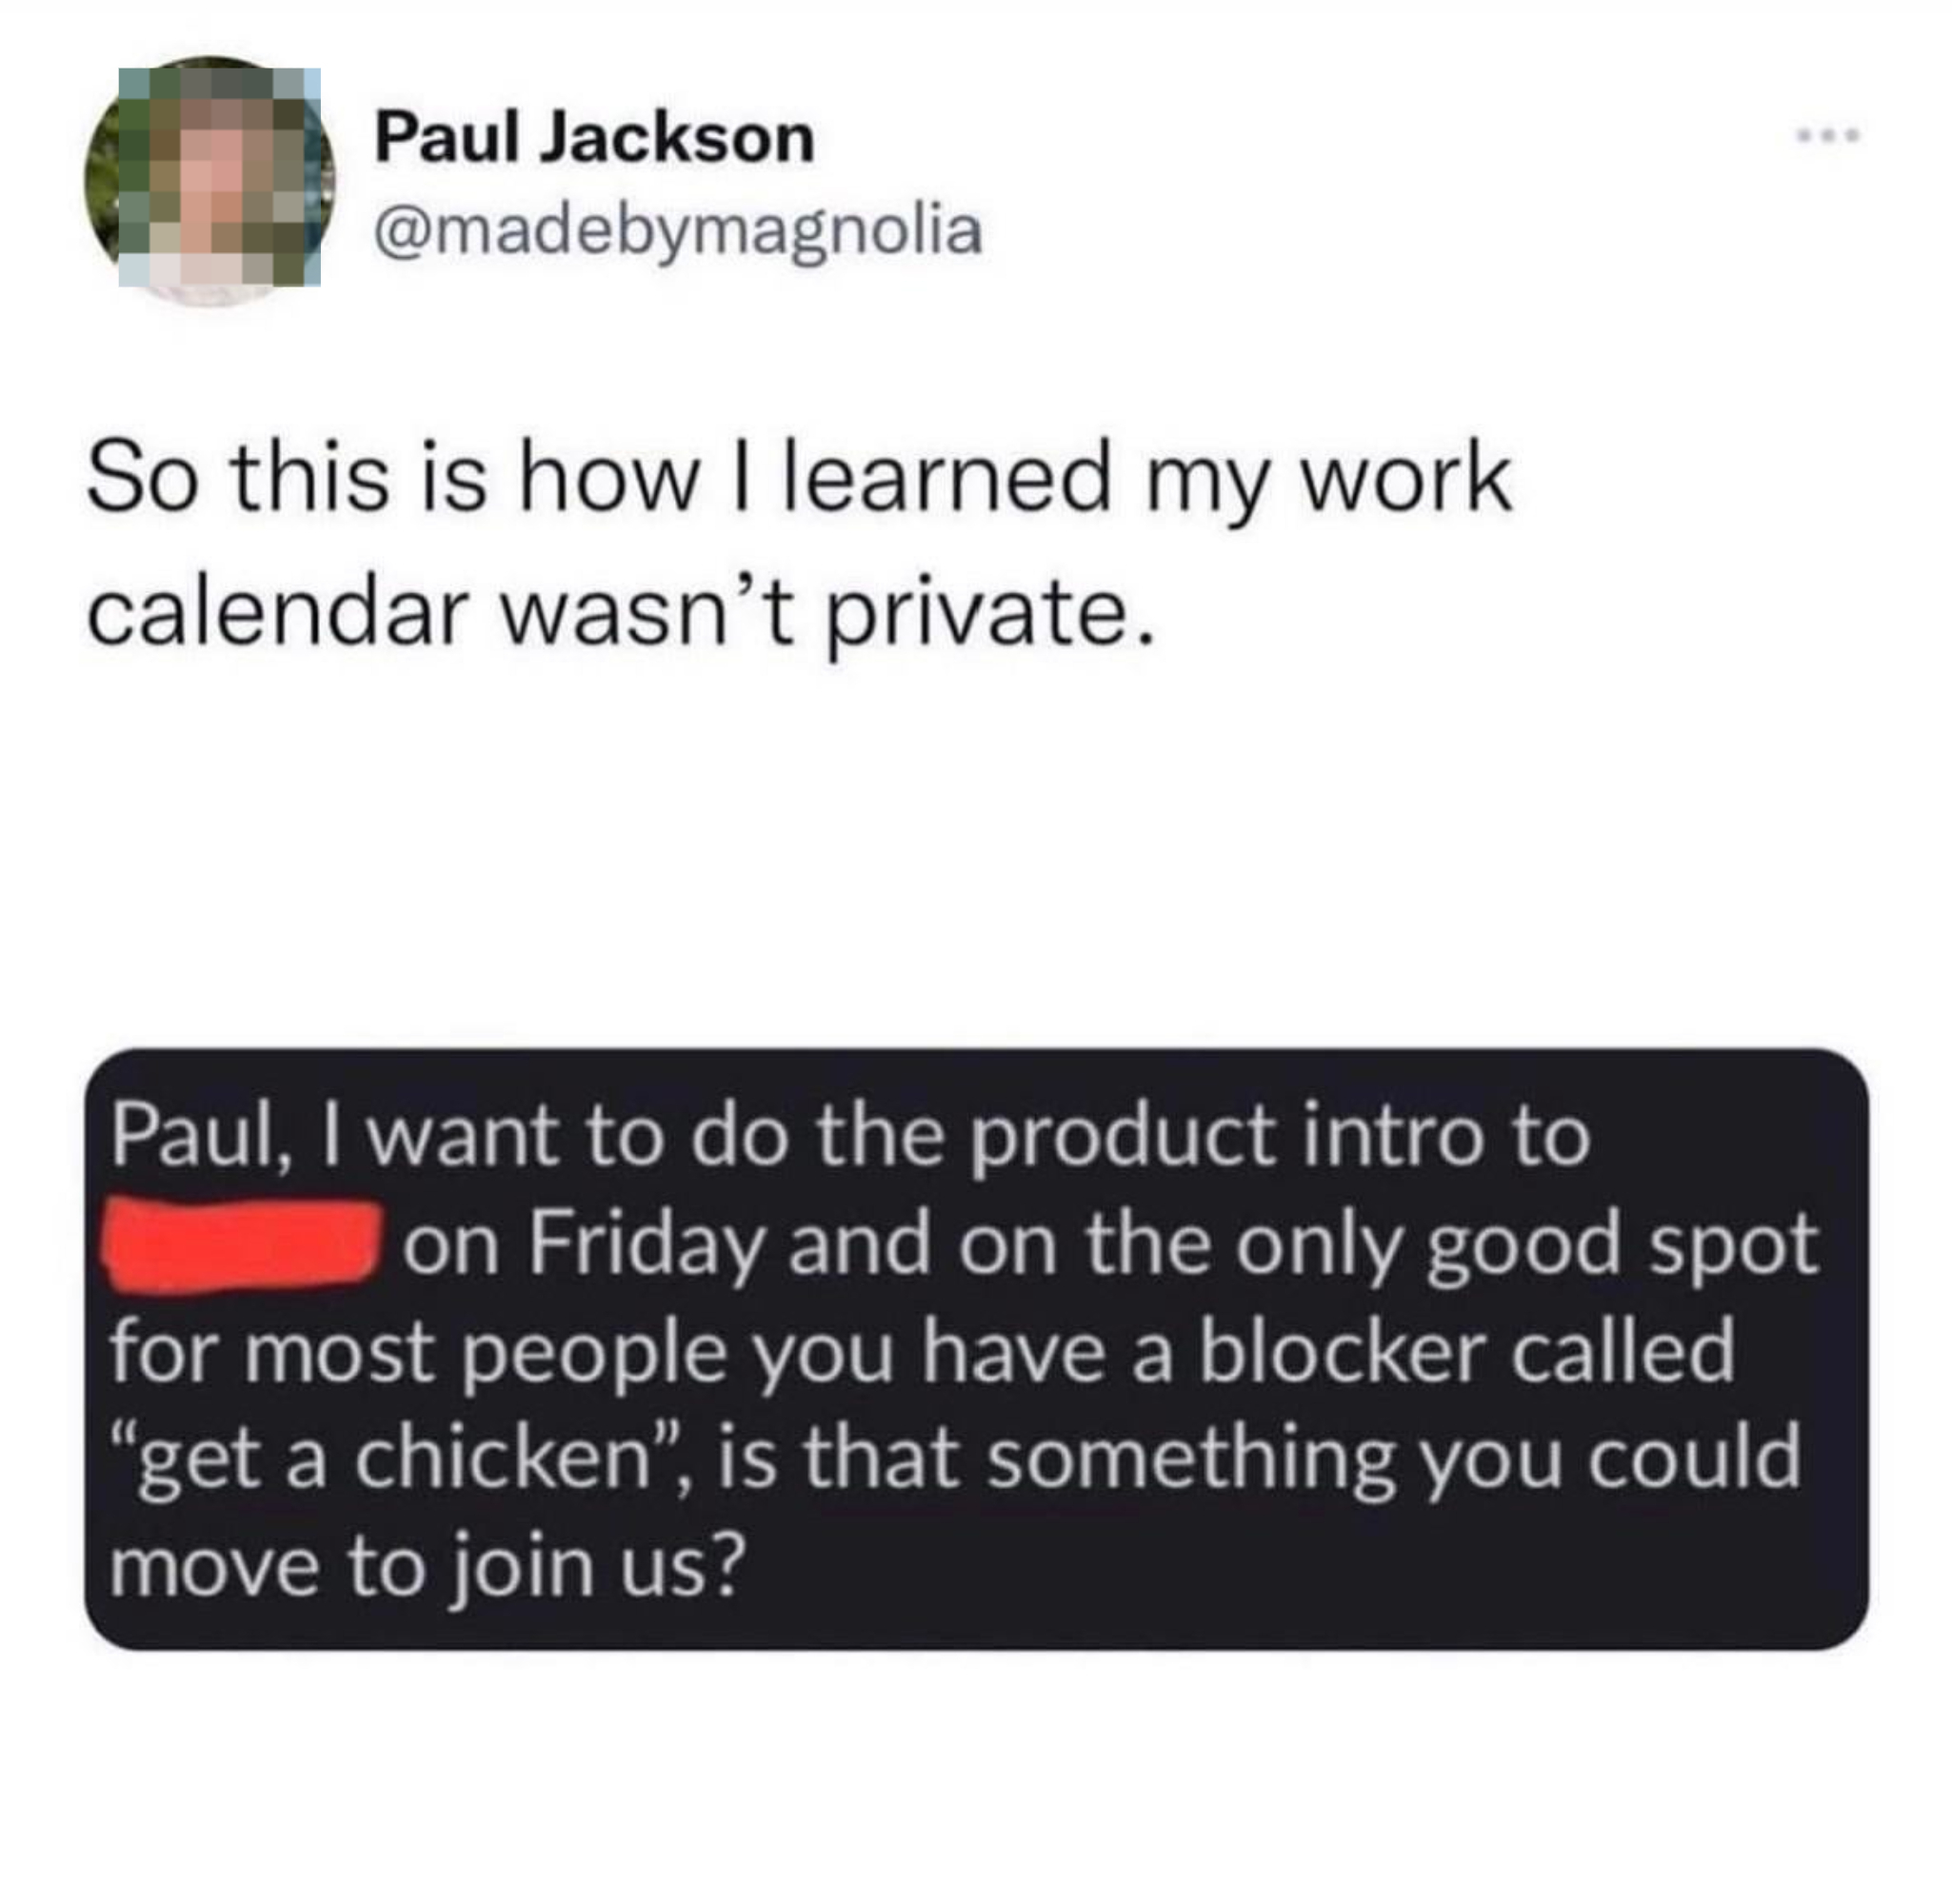 Screenshot of a social media post by Paul Jackbson with a text exchange about a work calendar event titled &quot;get a chicken&quot; causing scheduling conflict